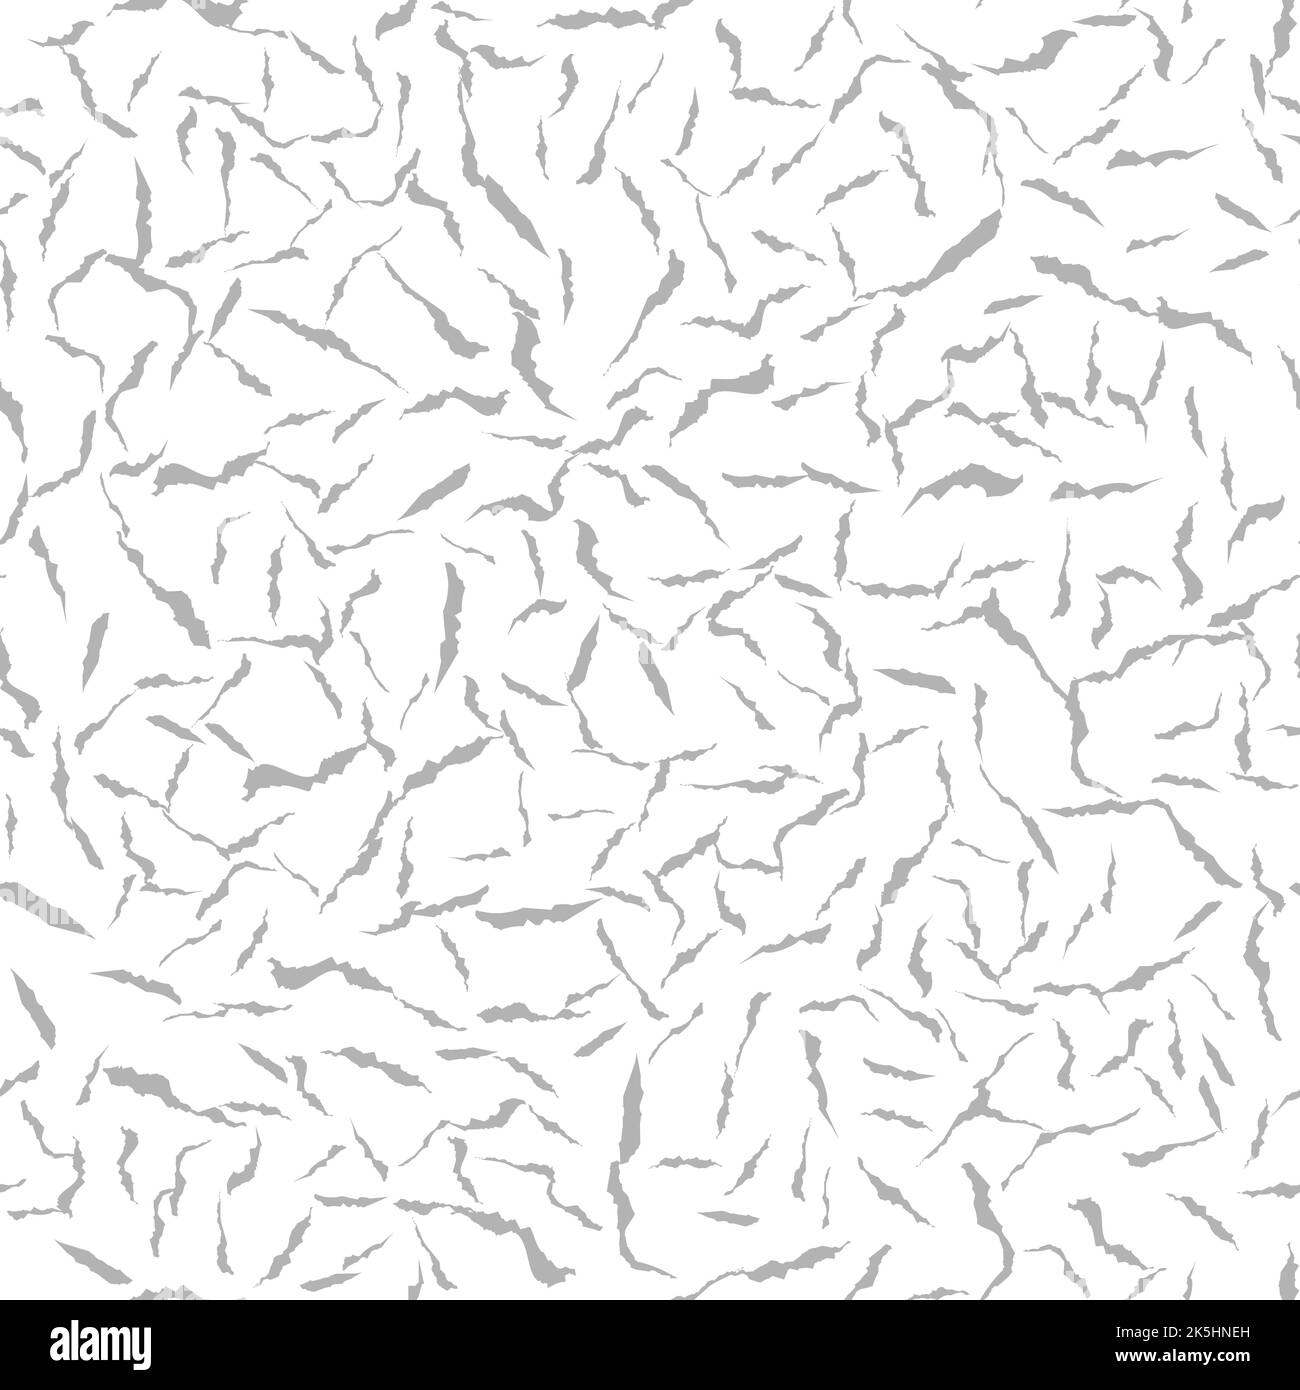 Cracked seamless pattern. Abstract background of crack symbols. Repeated cracks on white background. Scalable vector illustration in EPS8. Stock Vector